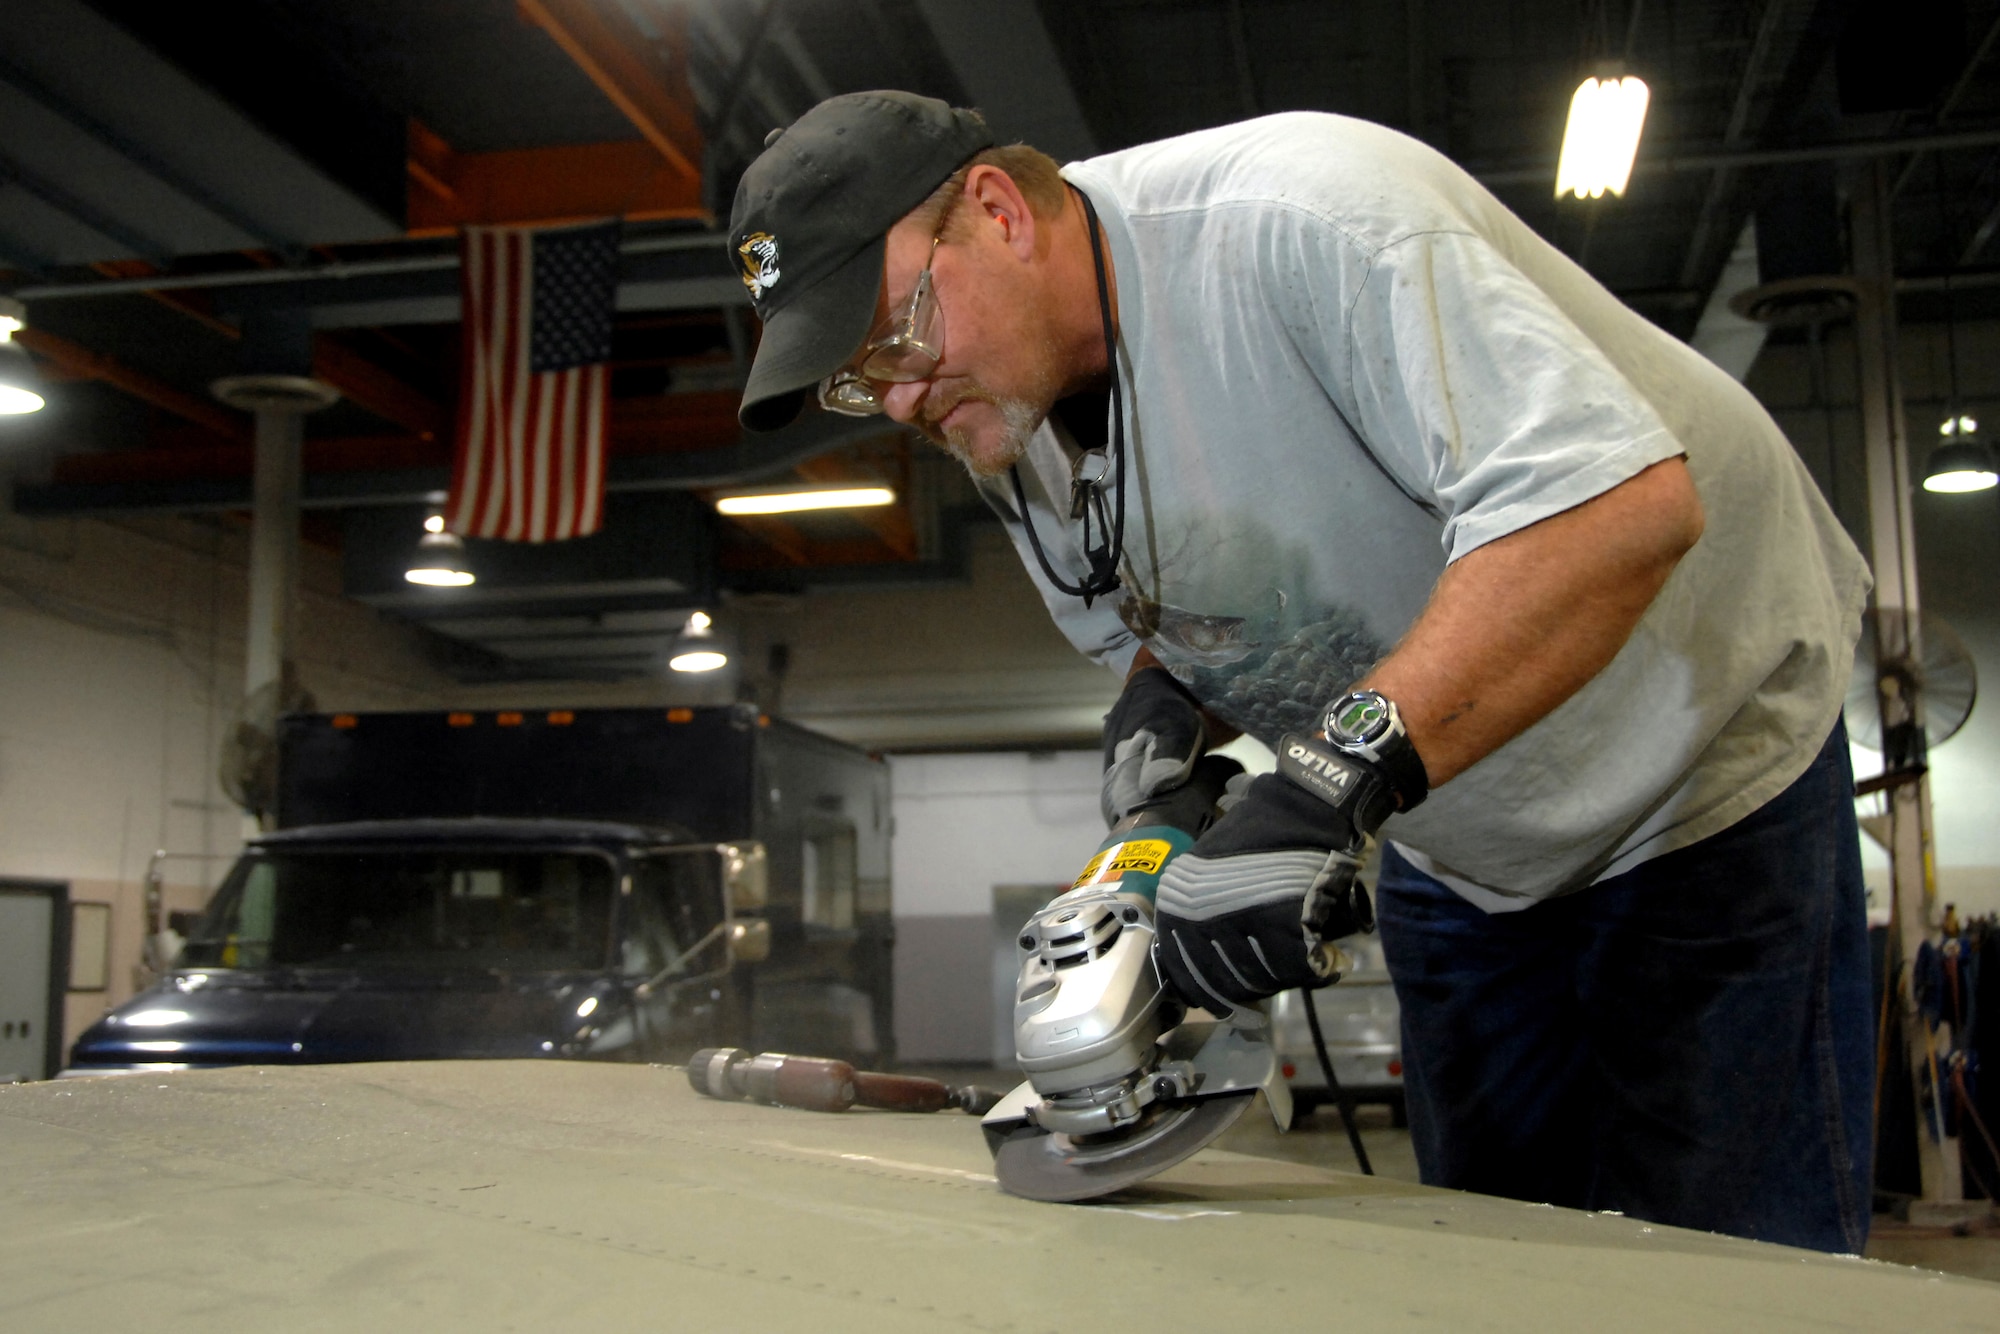 OFFUTT AIR FORCE BASE, Neb. -- Warren Darr, an aircraft structural maintainer and squadron information manager assigned to the 55th Maintenance Squadron, grinds down rivets on the horizontal stabilizer of a B17 static display aircraft in order to remove corroded sheet metal to ensure structural integrity of the historic air frame as part of a lengthy frame-off restoration.

U.S. Air Force Photo by Josh Plueger
